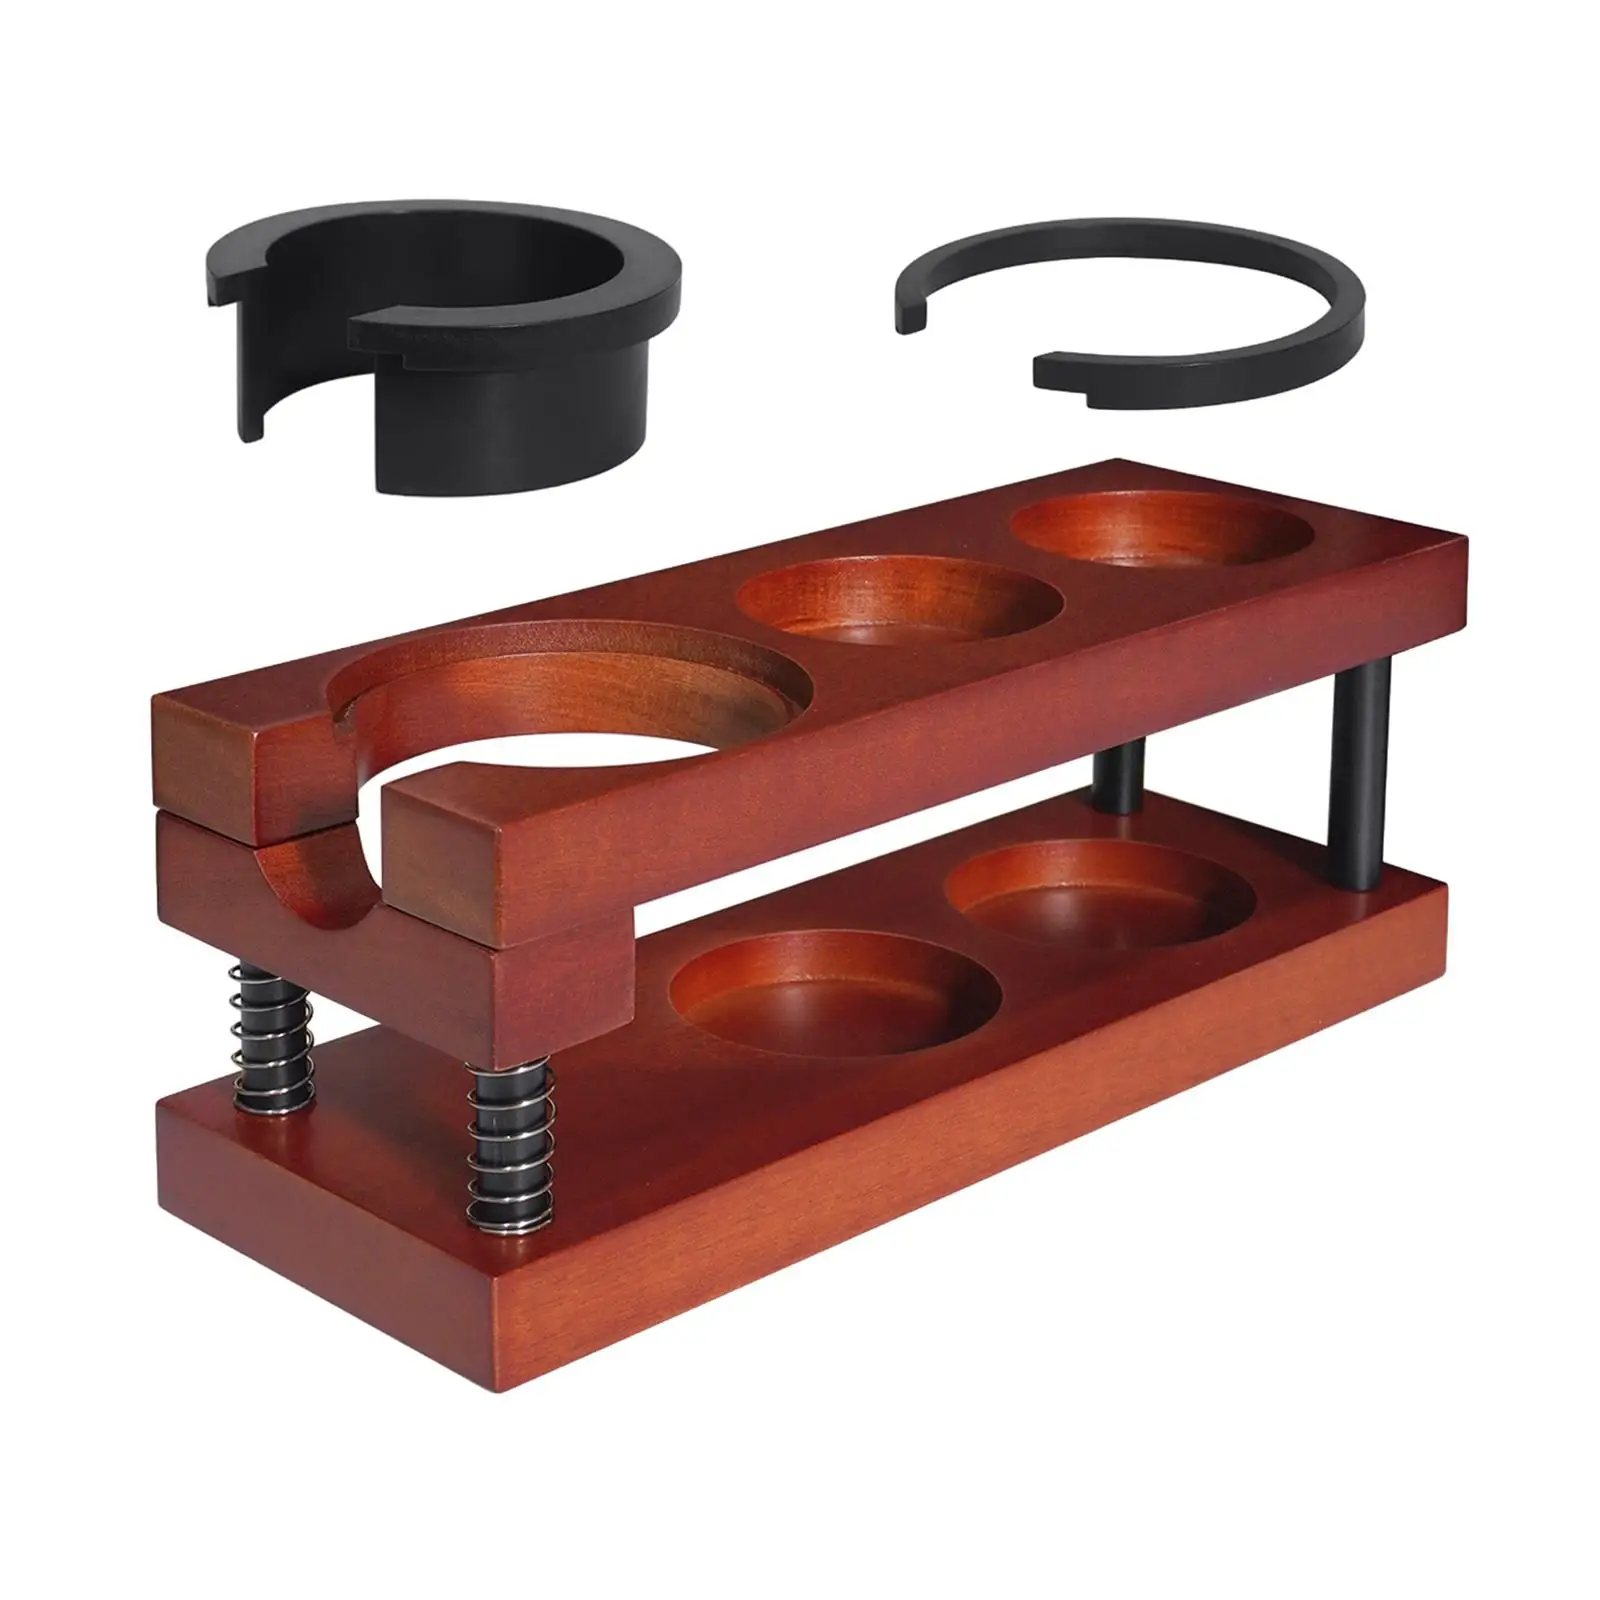 Wood Coffee Tamping Espresso Station Coffee Organizer Box Built in Spring Wood Espresso Tamper Holder Station for Shop Home